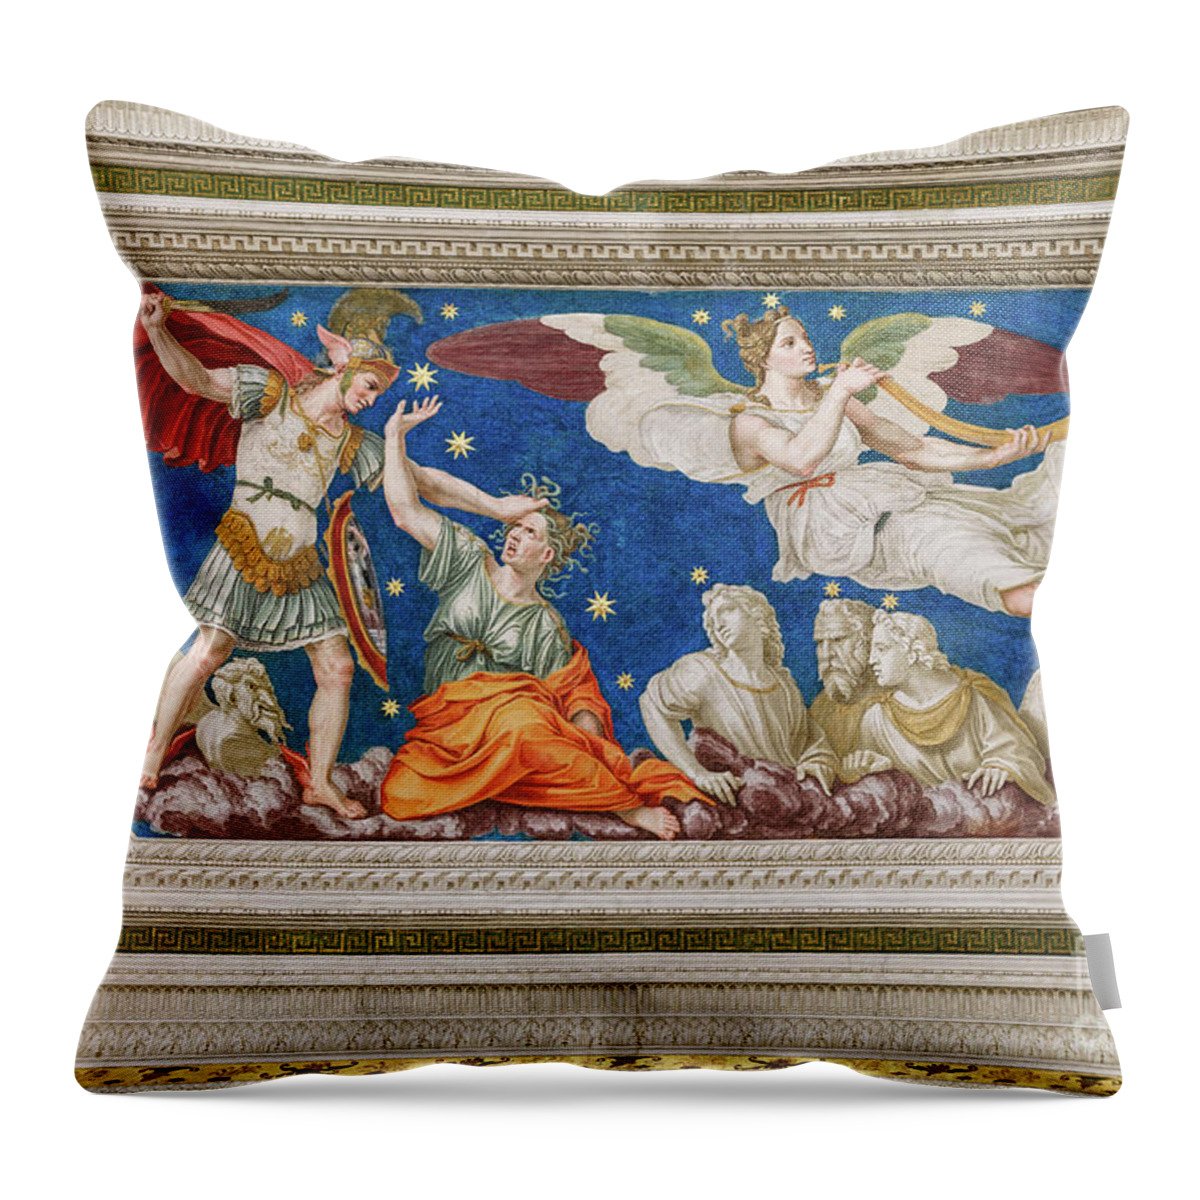 16th Century Throw Pillow featuring the painting The Myth Of Perseus And Gorgon Medusa, And Fame, 1511 by Baldassarre Peruzzi